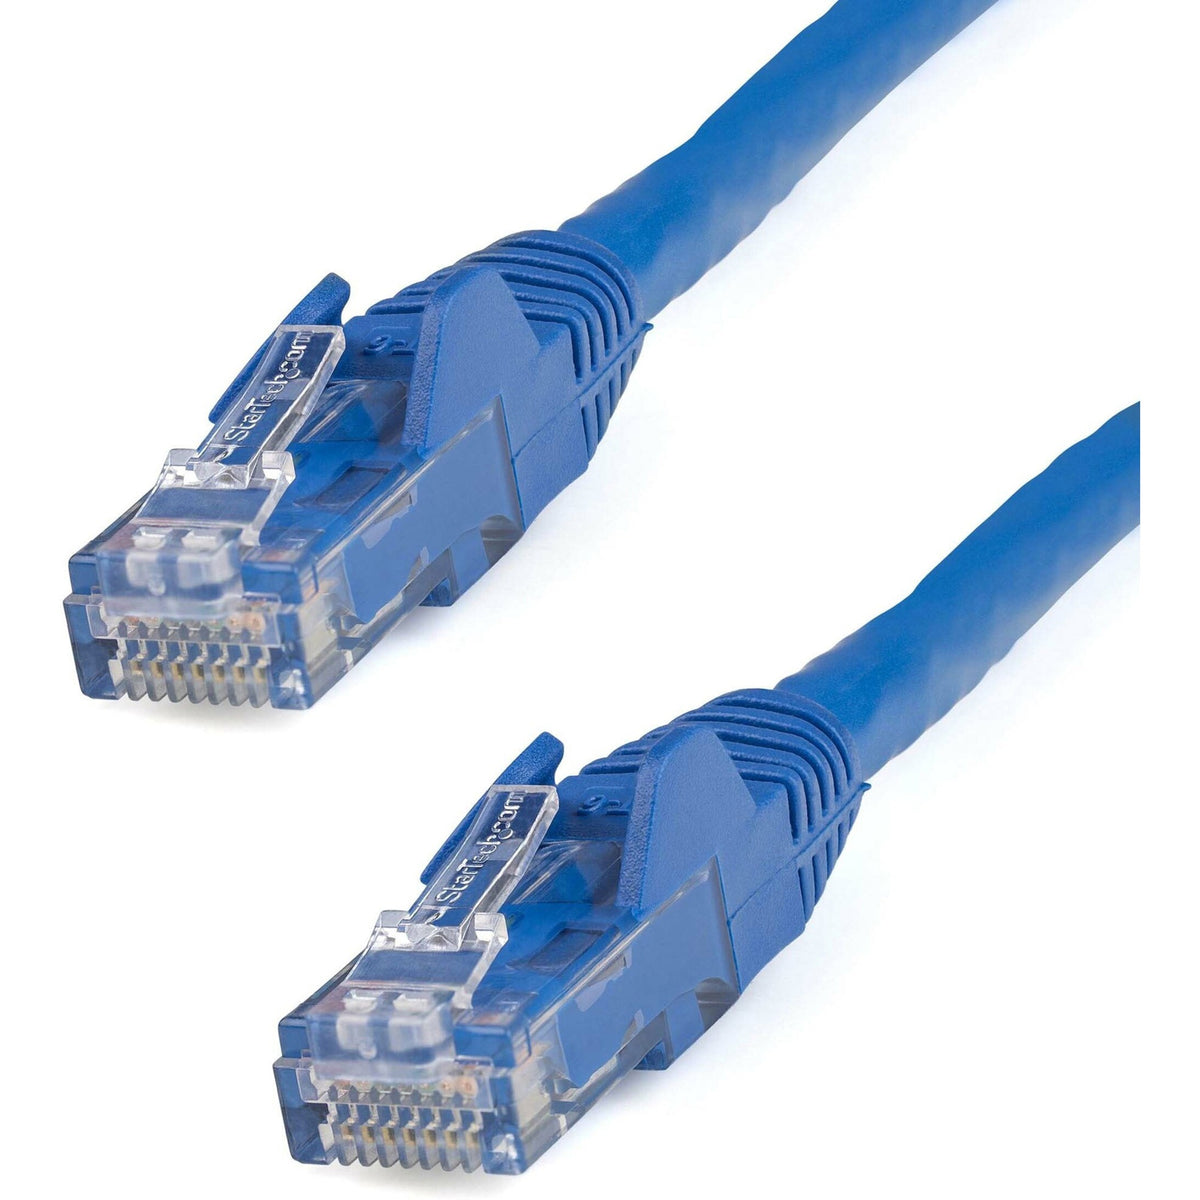 StarTech.com 6in CAT6 Ethernet Cable - Blue Snagless Gigabit - 100W PoE UTP 650MHz Category 6 Patch Cord UL Certified Wiring/TIA - N6PATCH6INBL